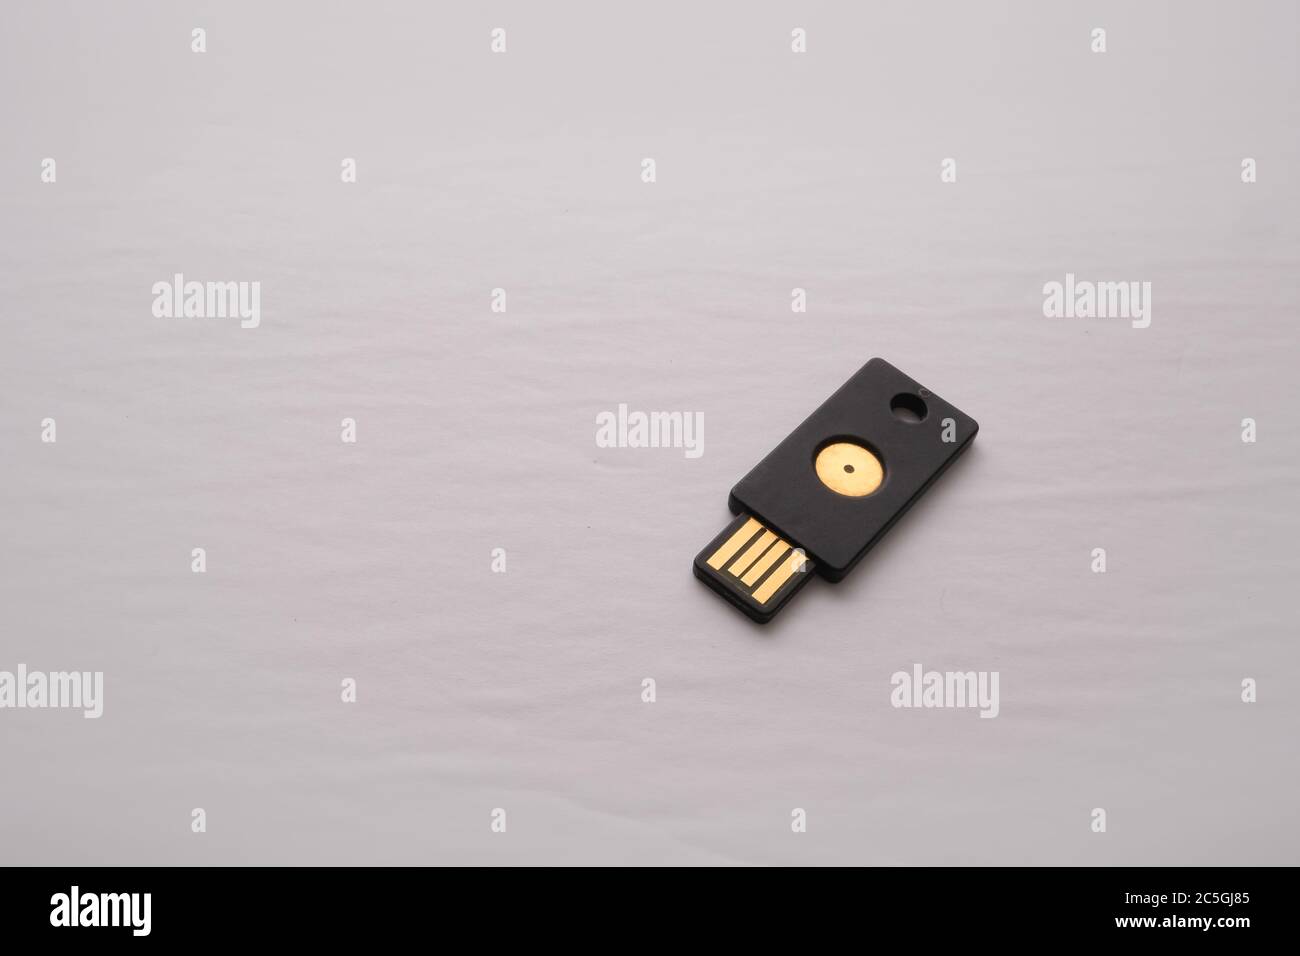 An isolated USB device containing a security key is used for two-factor  authentication adding a layer of security to logins and authorization  online Stock Photo - Alamy